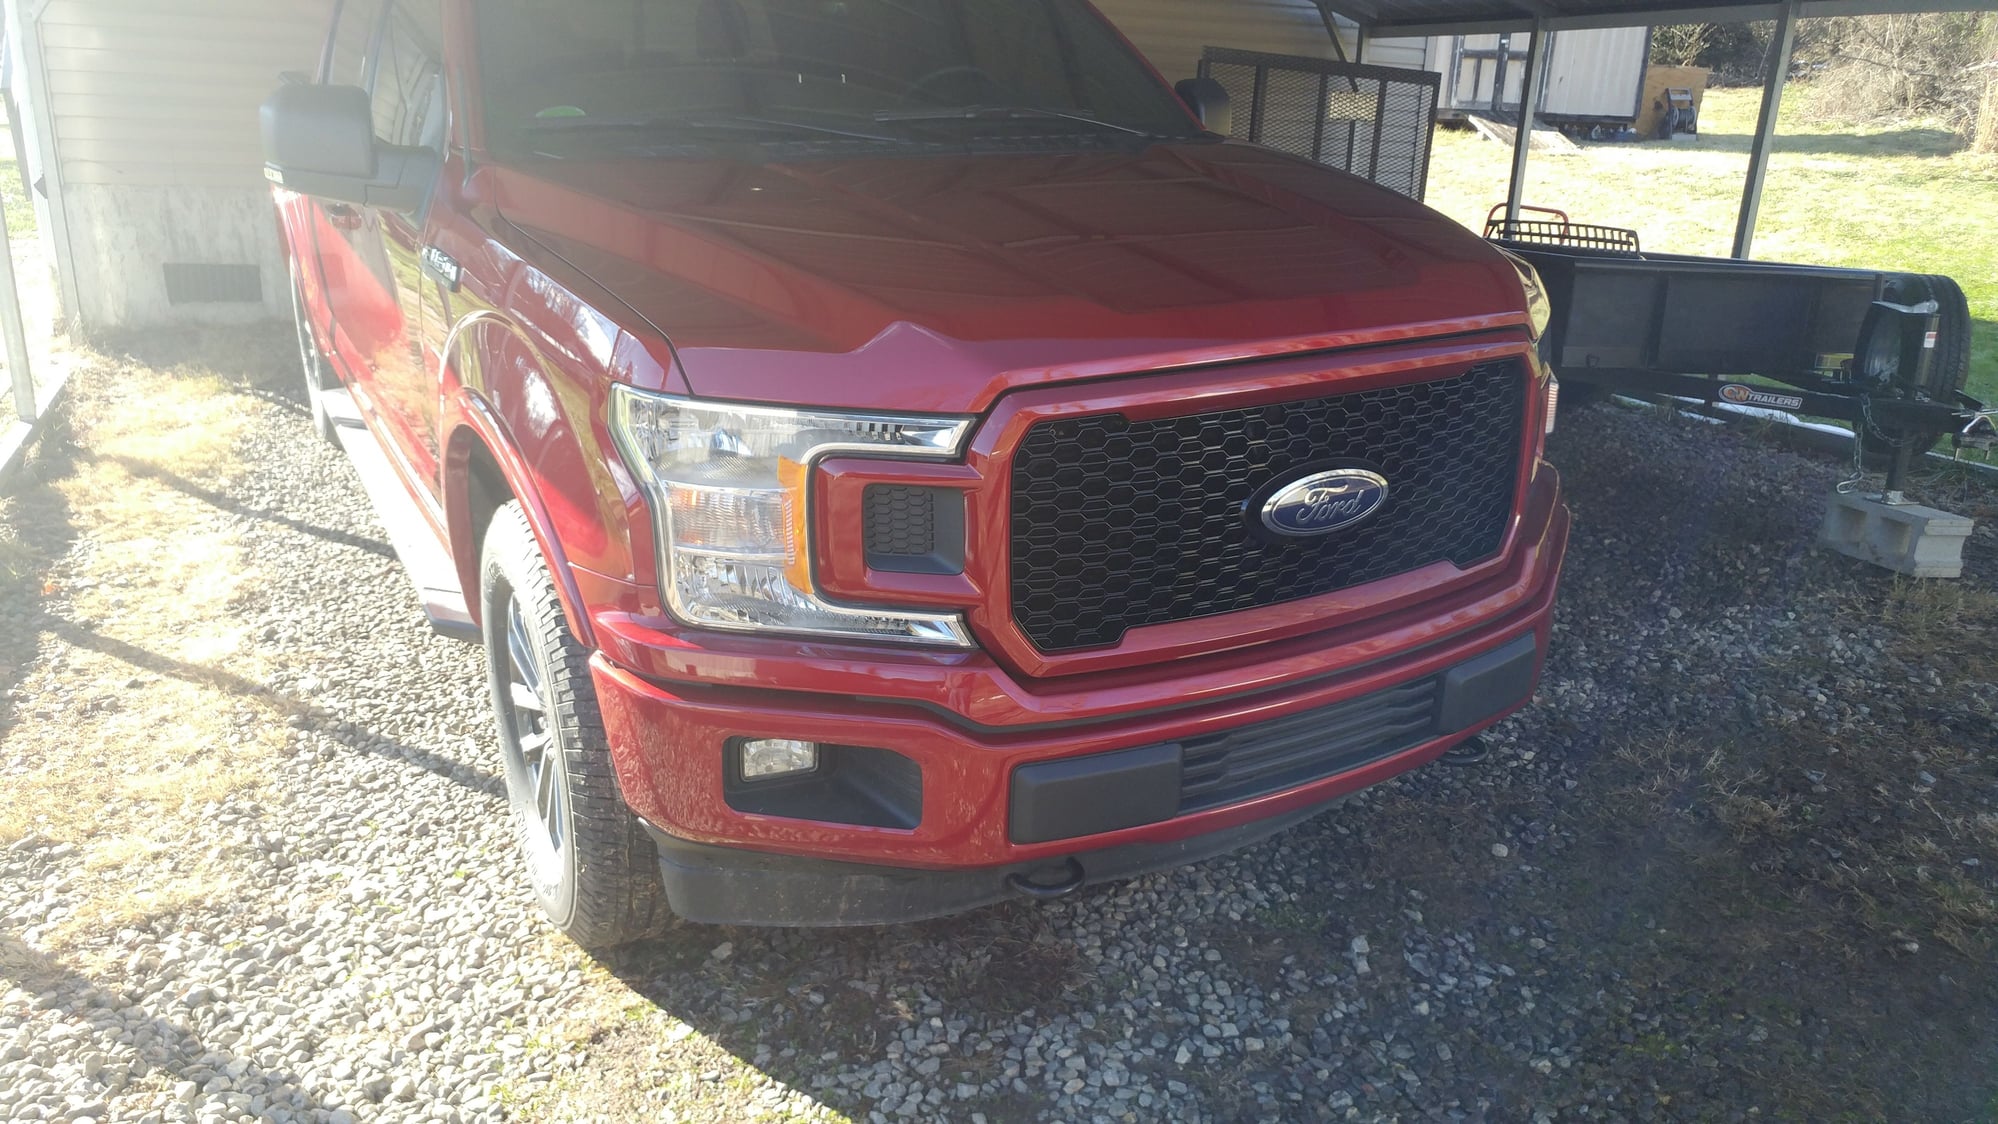 Official 2018 Grille Replacement Thread - Page 73 - Ford F150 Forum